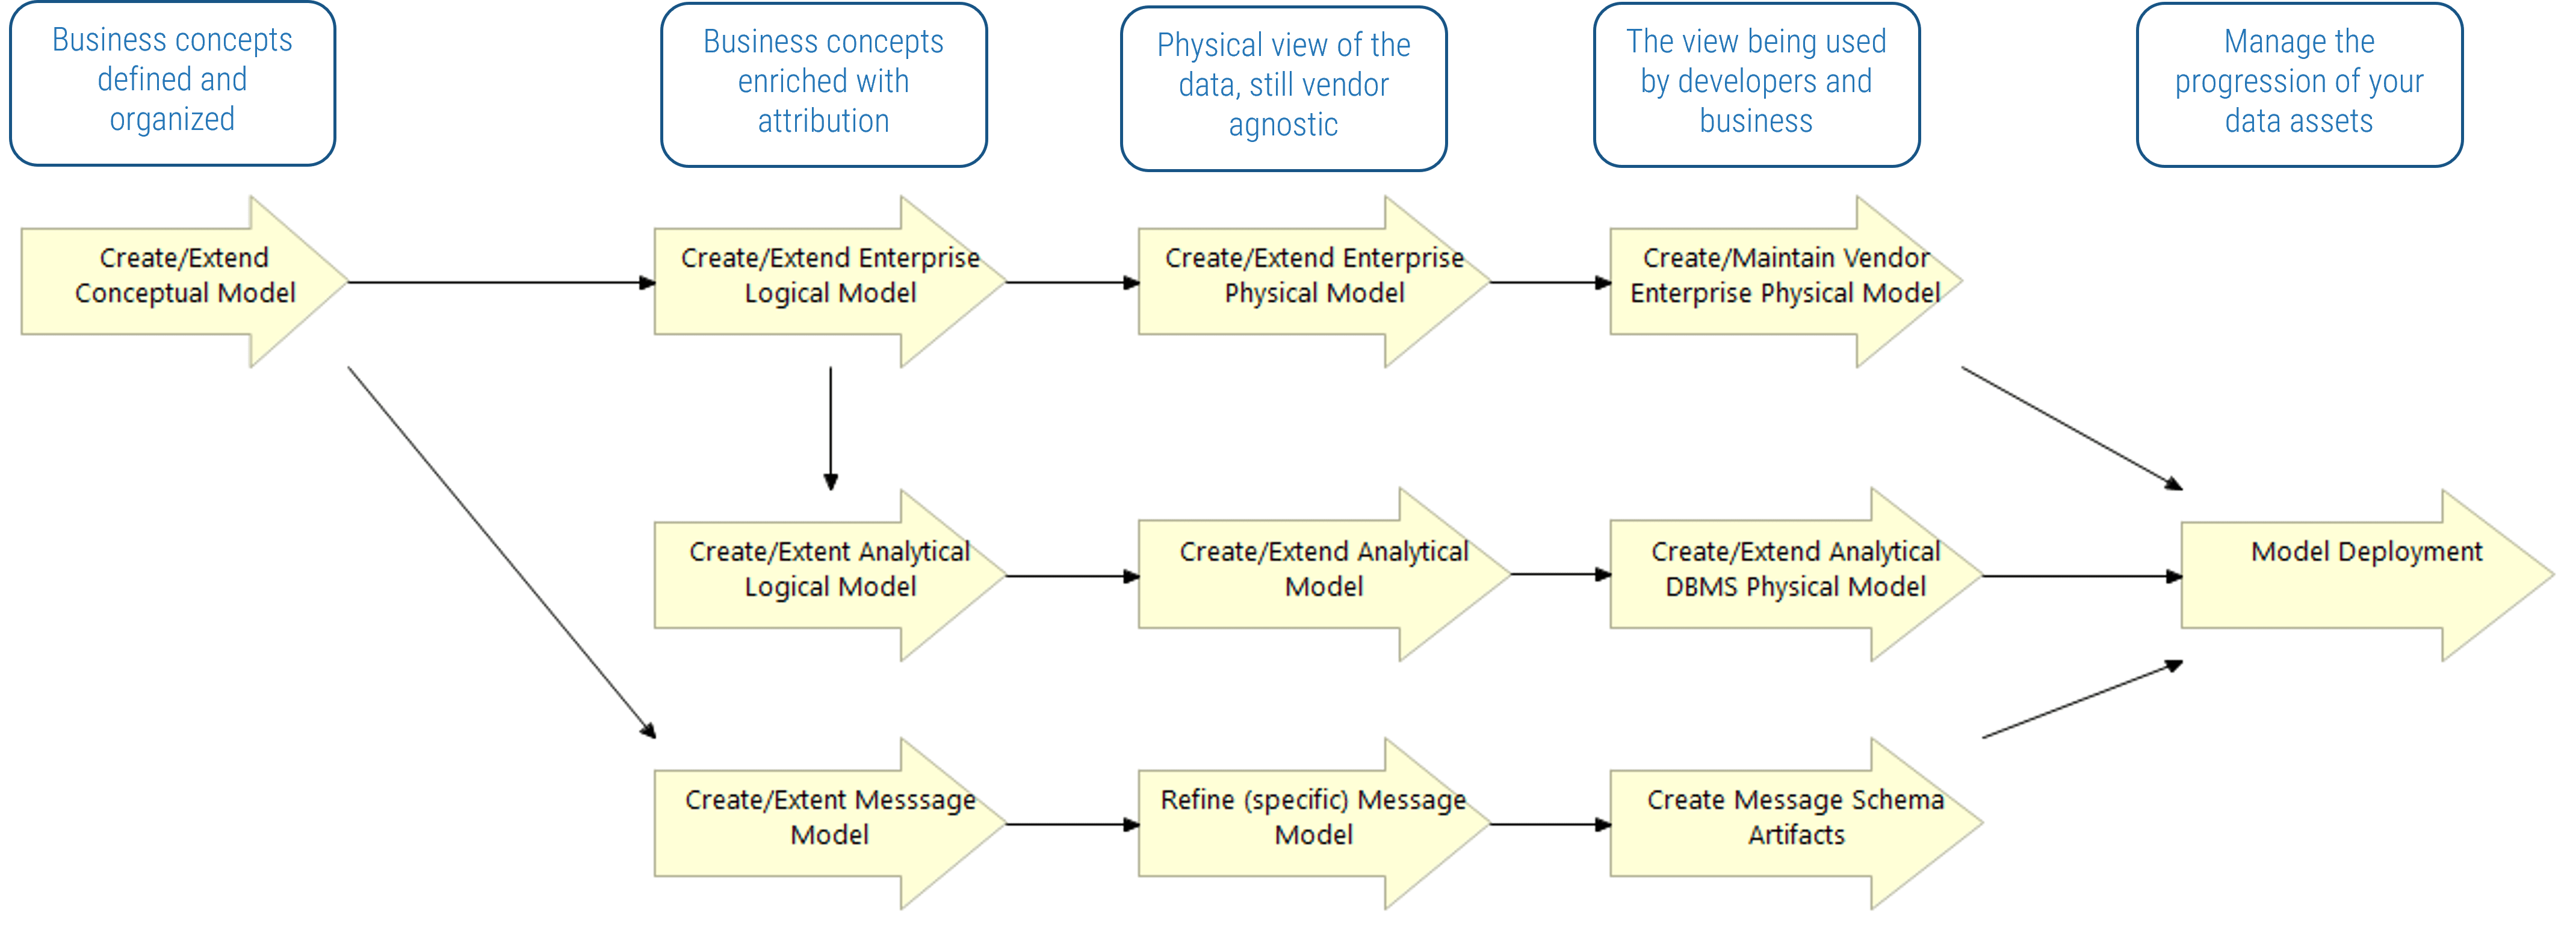 A diagram moving from right to left through 5 phases: 'Business concepts defined and organized', 'Business concepts enriched with attribution', 'Physical view of the data, still vendor agnostic', 'The view being used by developers and business', and 'Manage the progression of your data assets'.